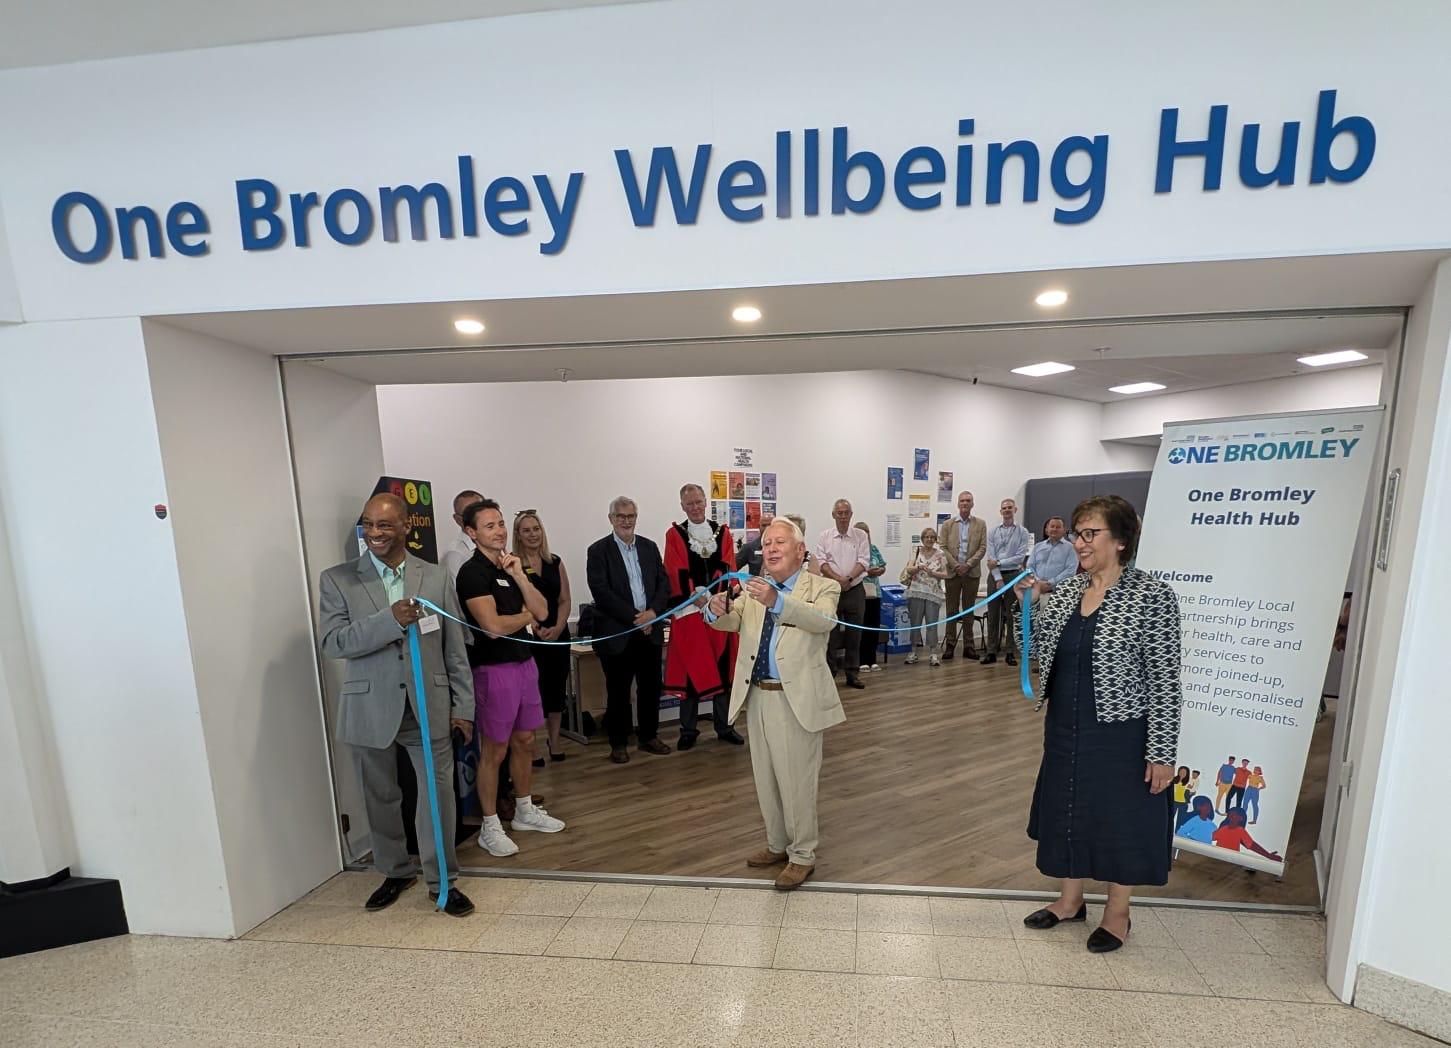 One Bromley Wellbeing Hub